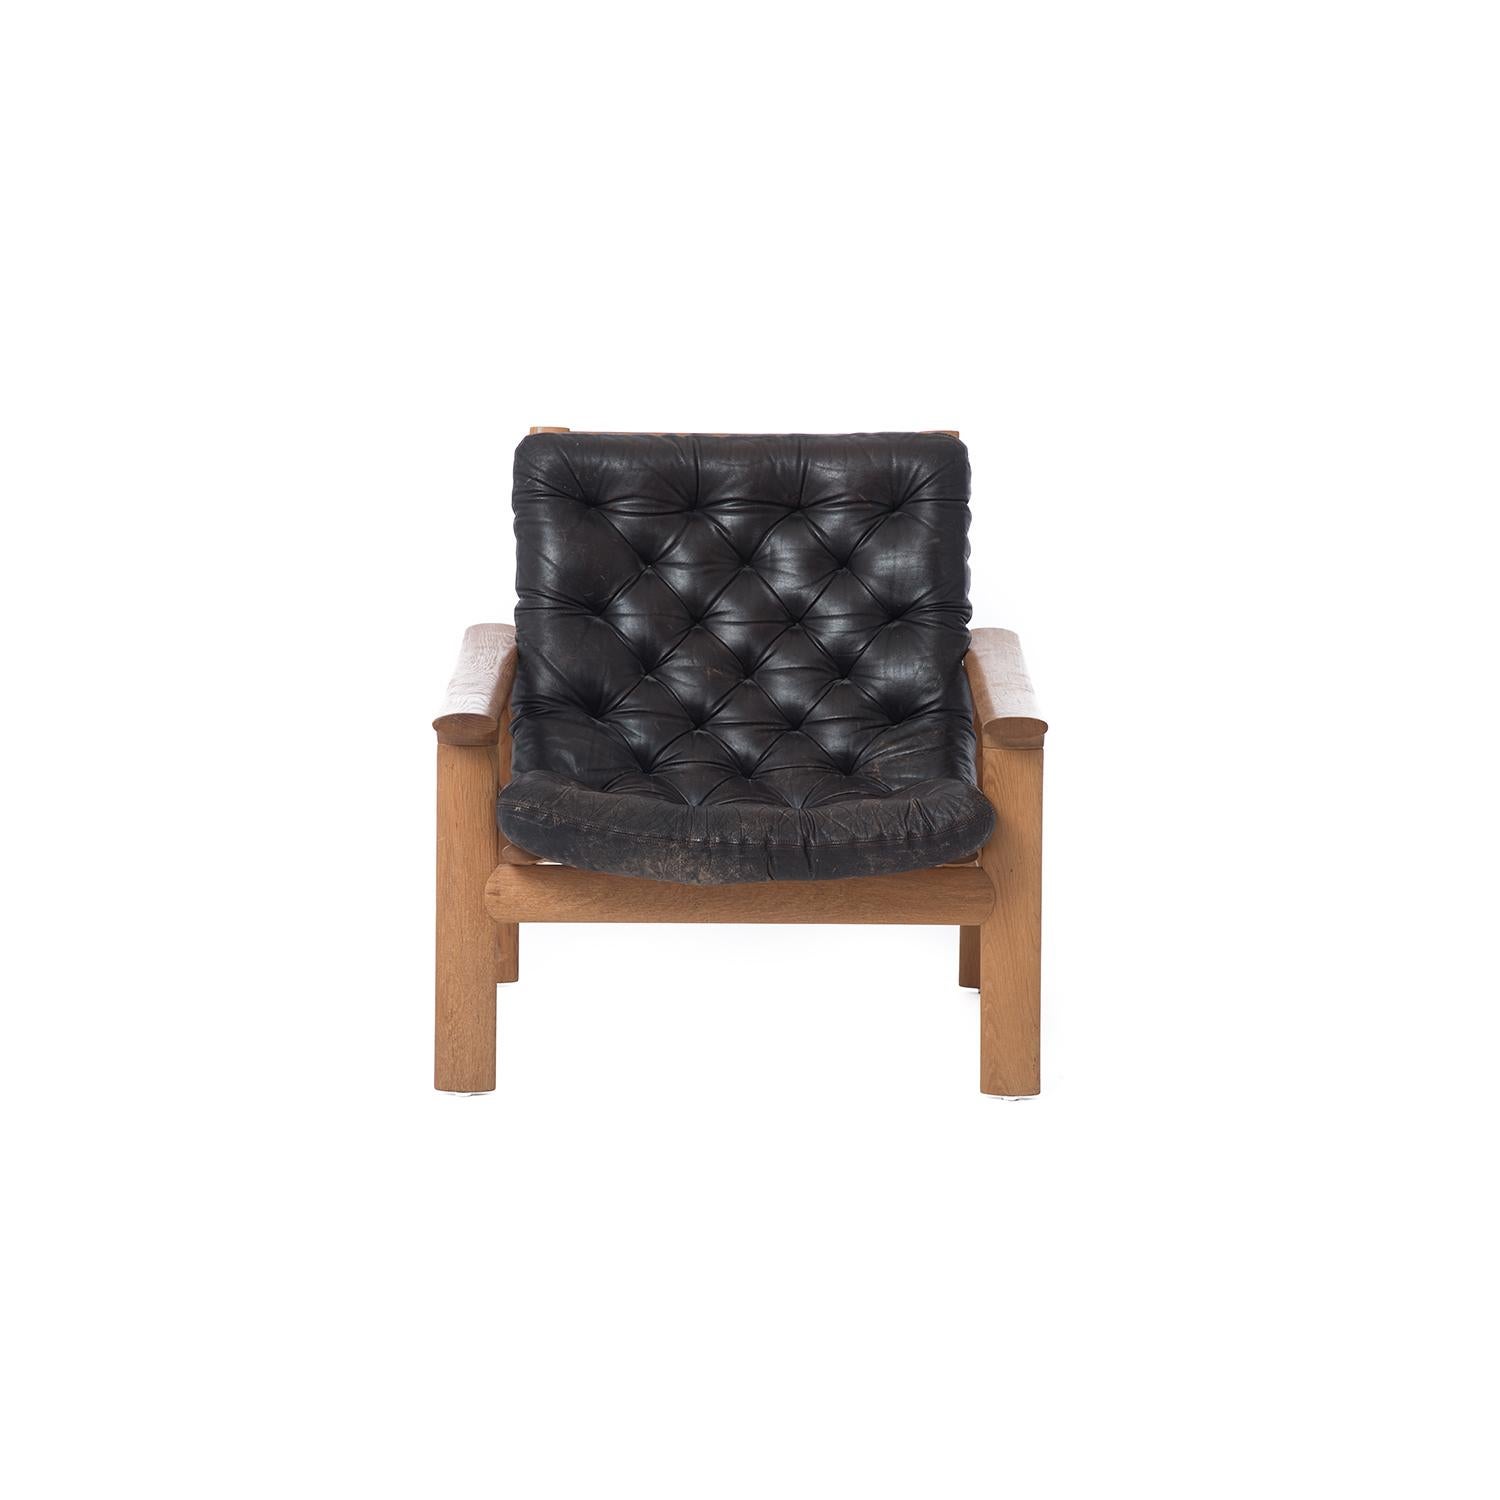 These low-profile oak lounge chairs feature dark brown tufted leather upholstery. Sold separately.